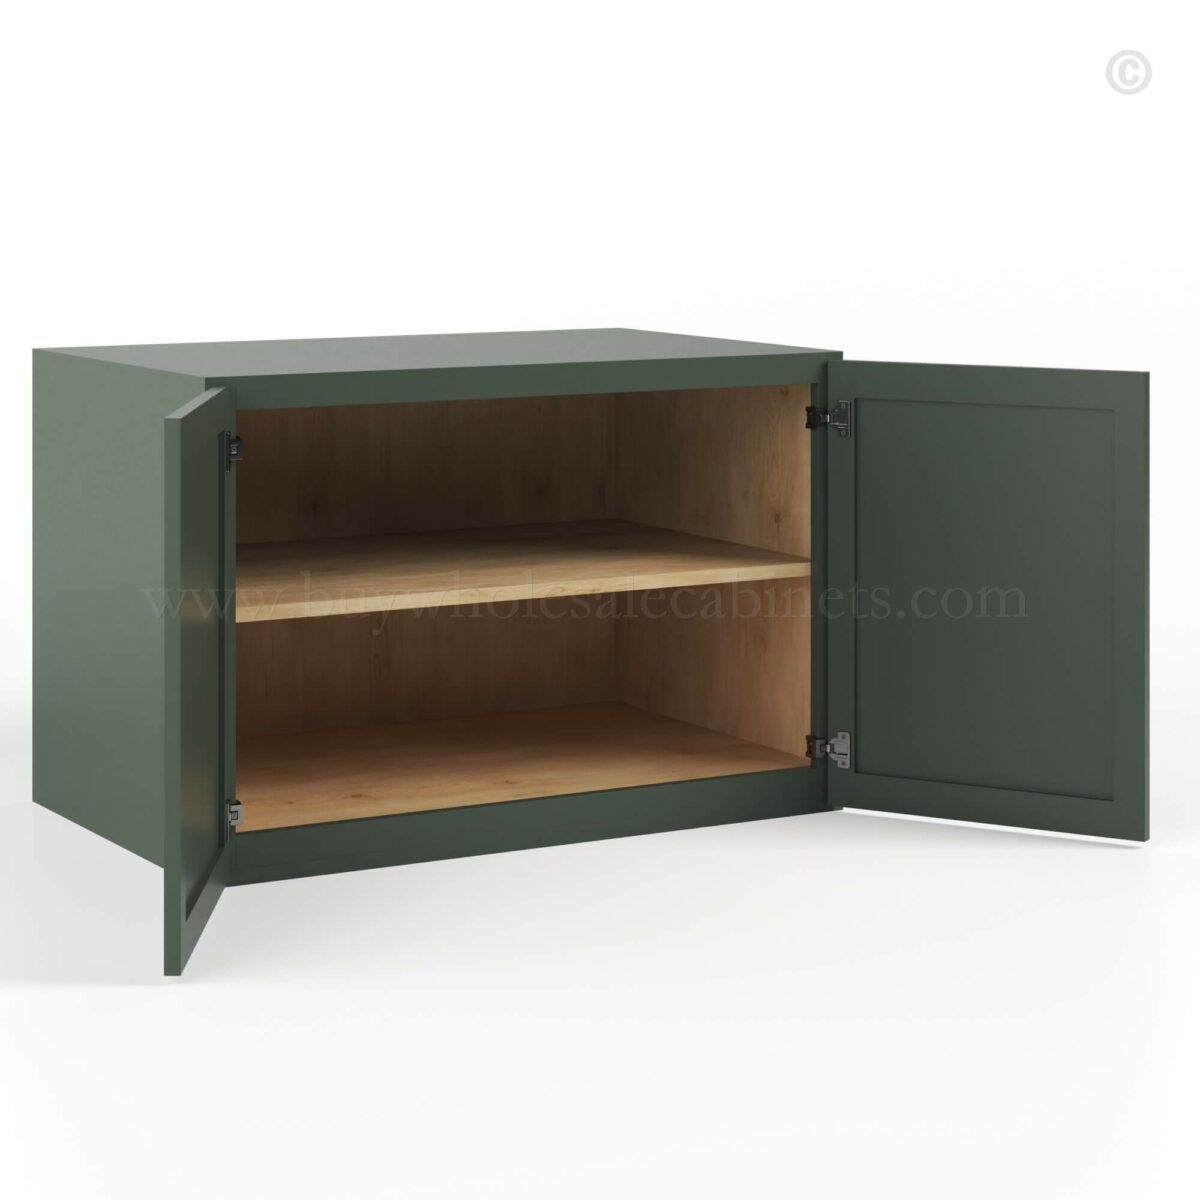 Slim Shaker Green Double Door Wall Cabinets, rta cabinets, wholesale cabinets